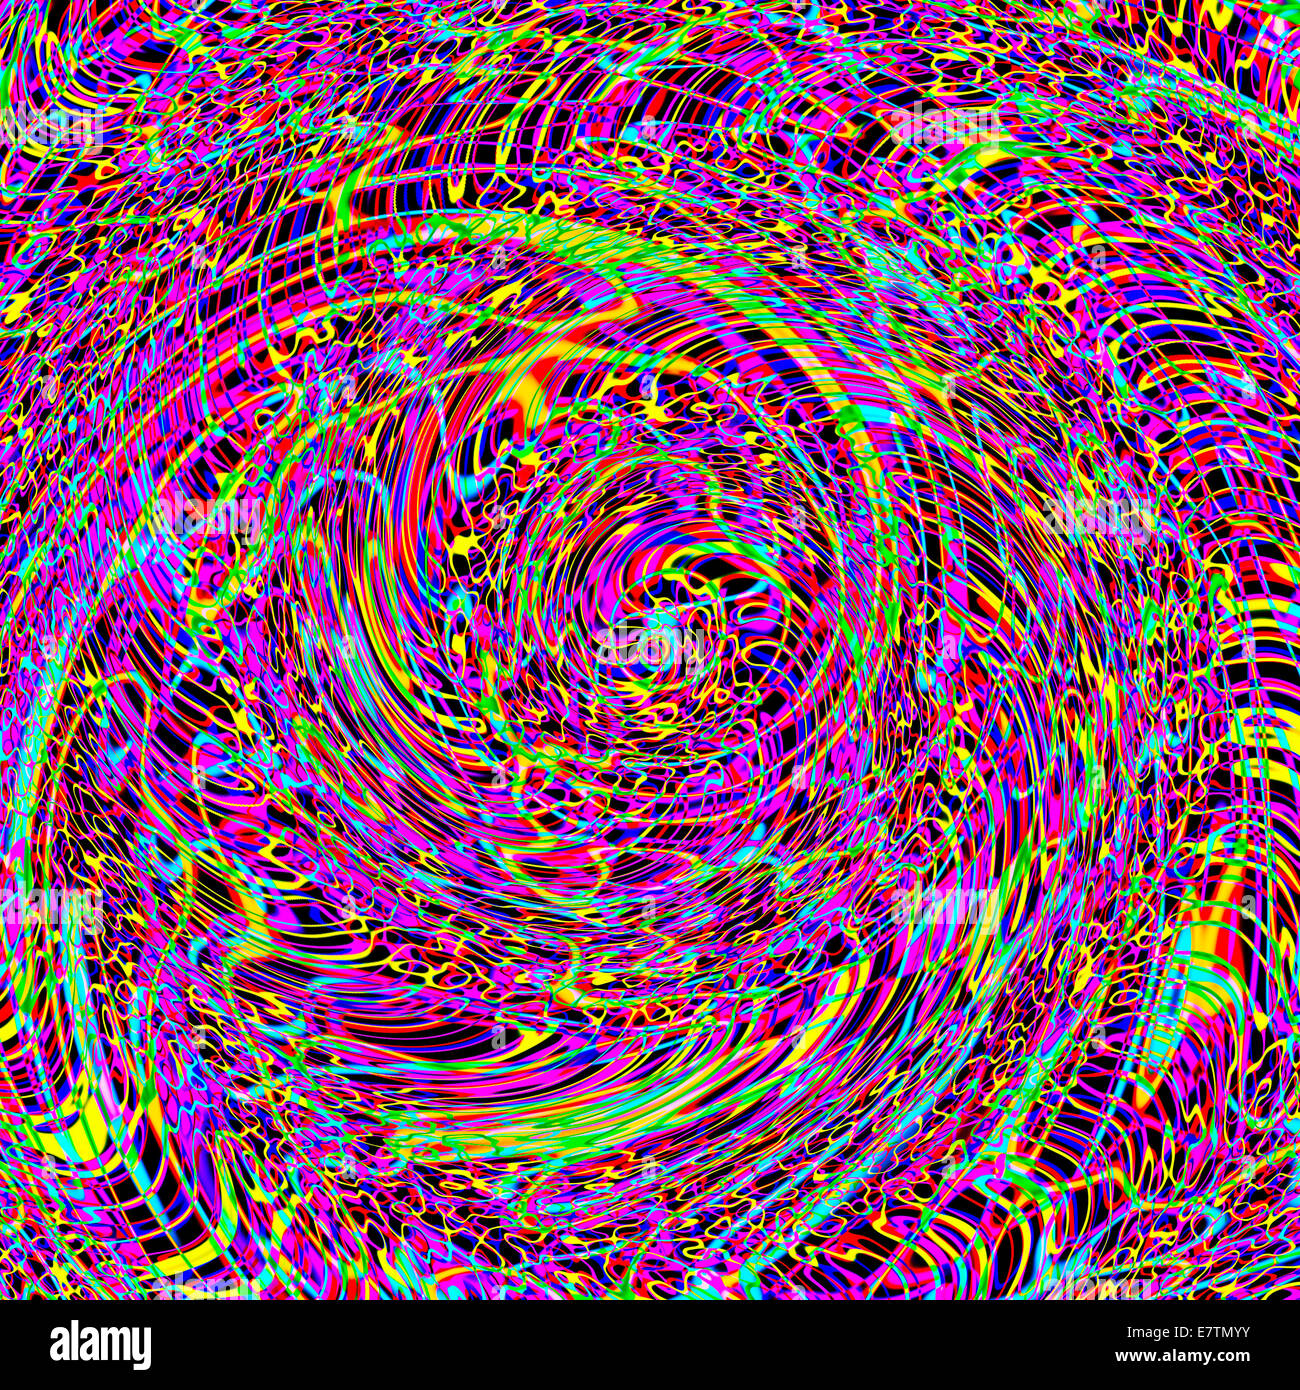 Multicoloured abstract pattern, computer artwork. Stock Photo